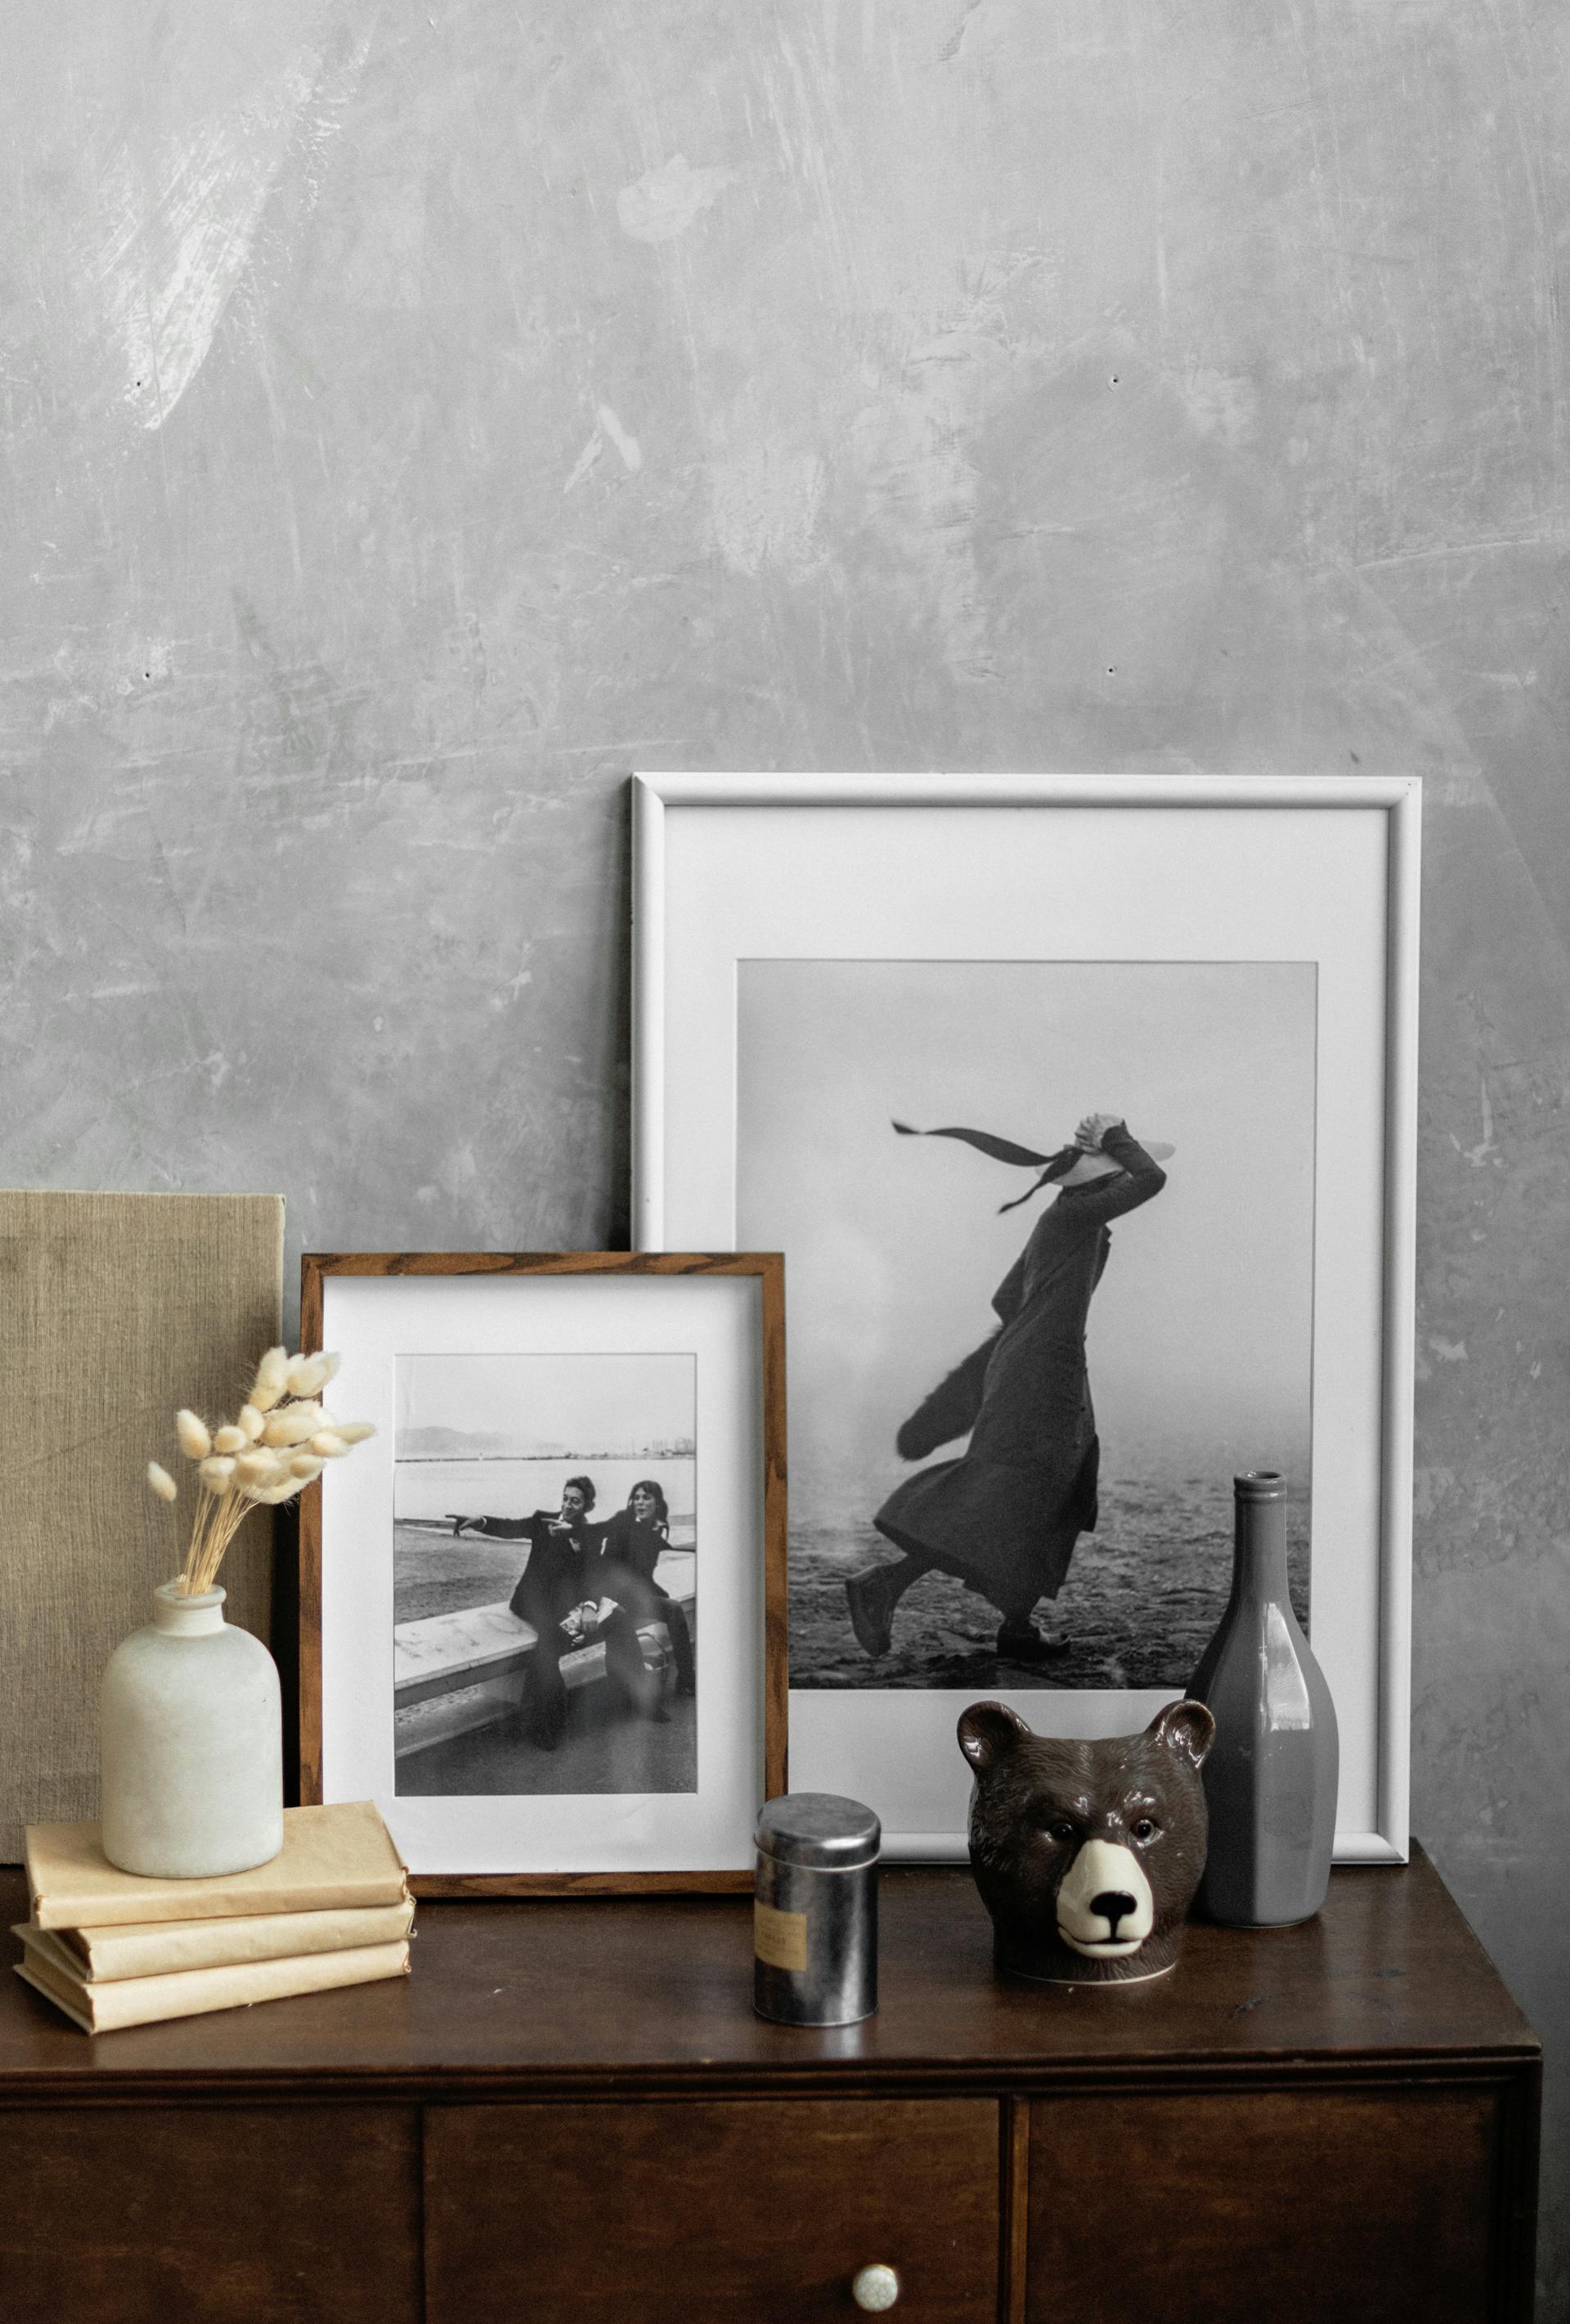 Photo frames, books, and other decorative items lying on a side table | Source: Pexels